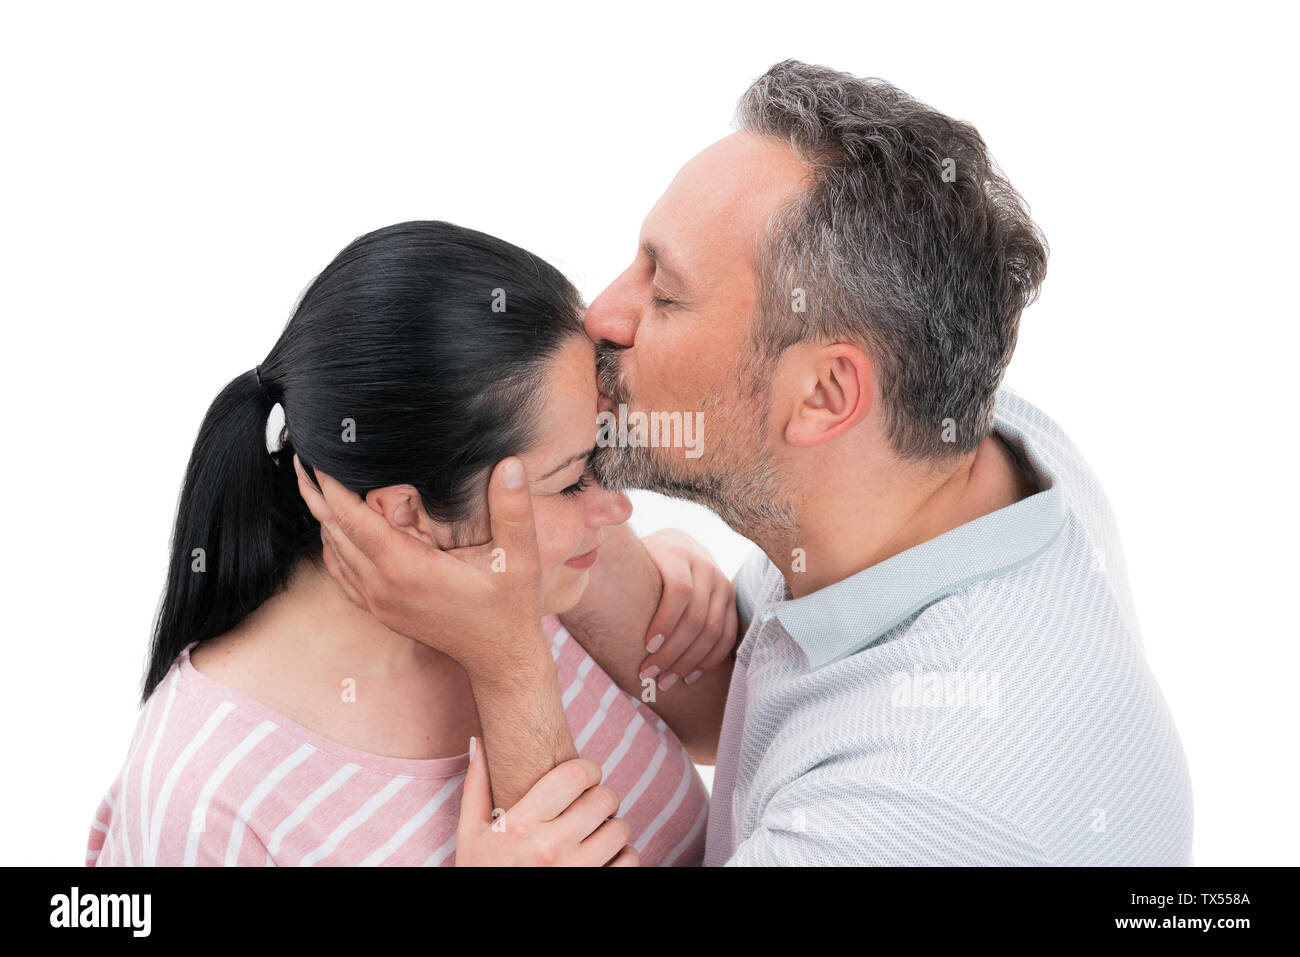 Loving man kissing forehead of smiling woman as cute relationship gesture isolated on white background Stock Photo